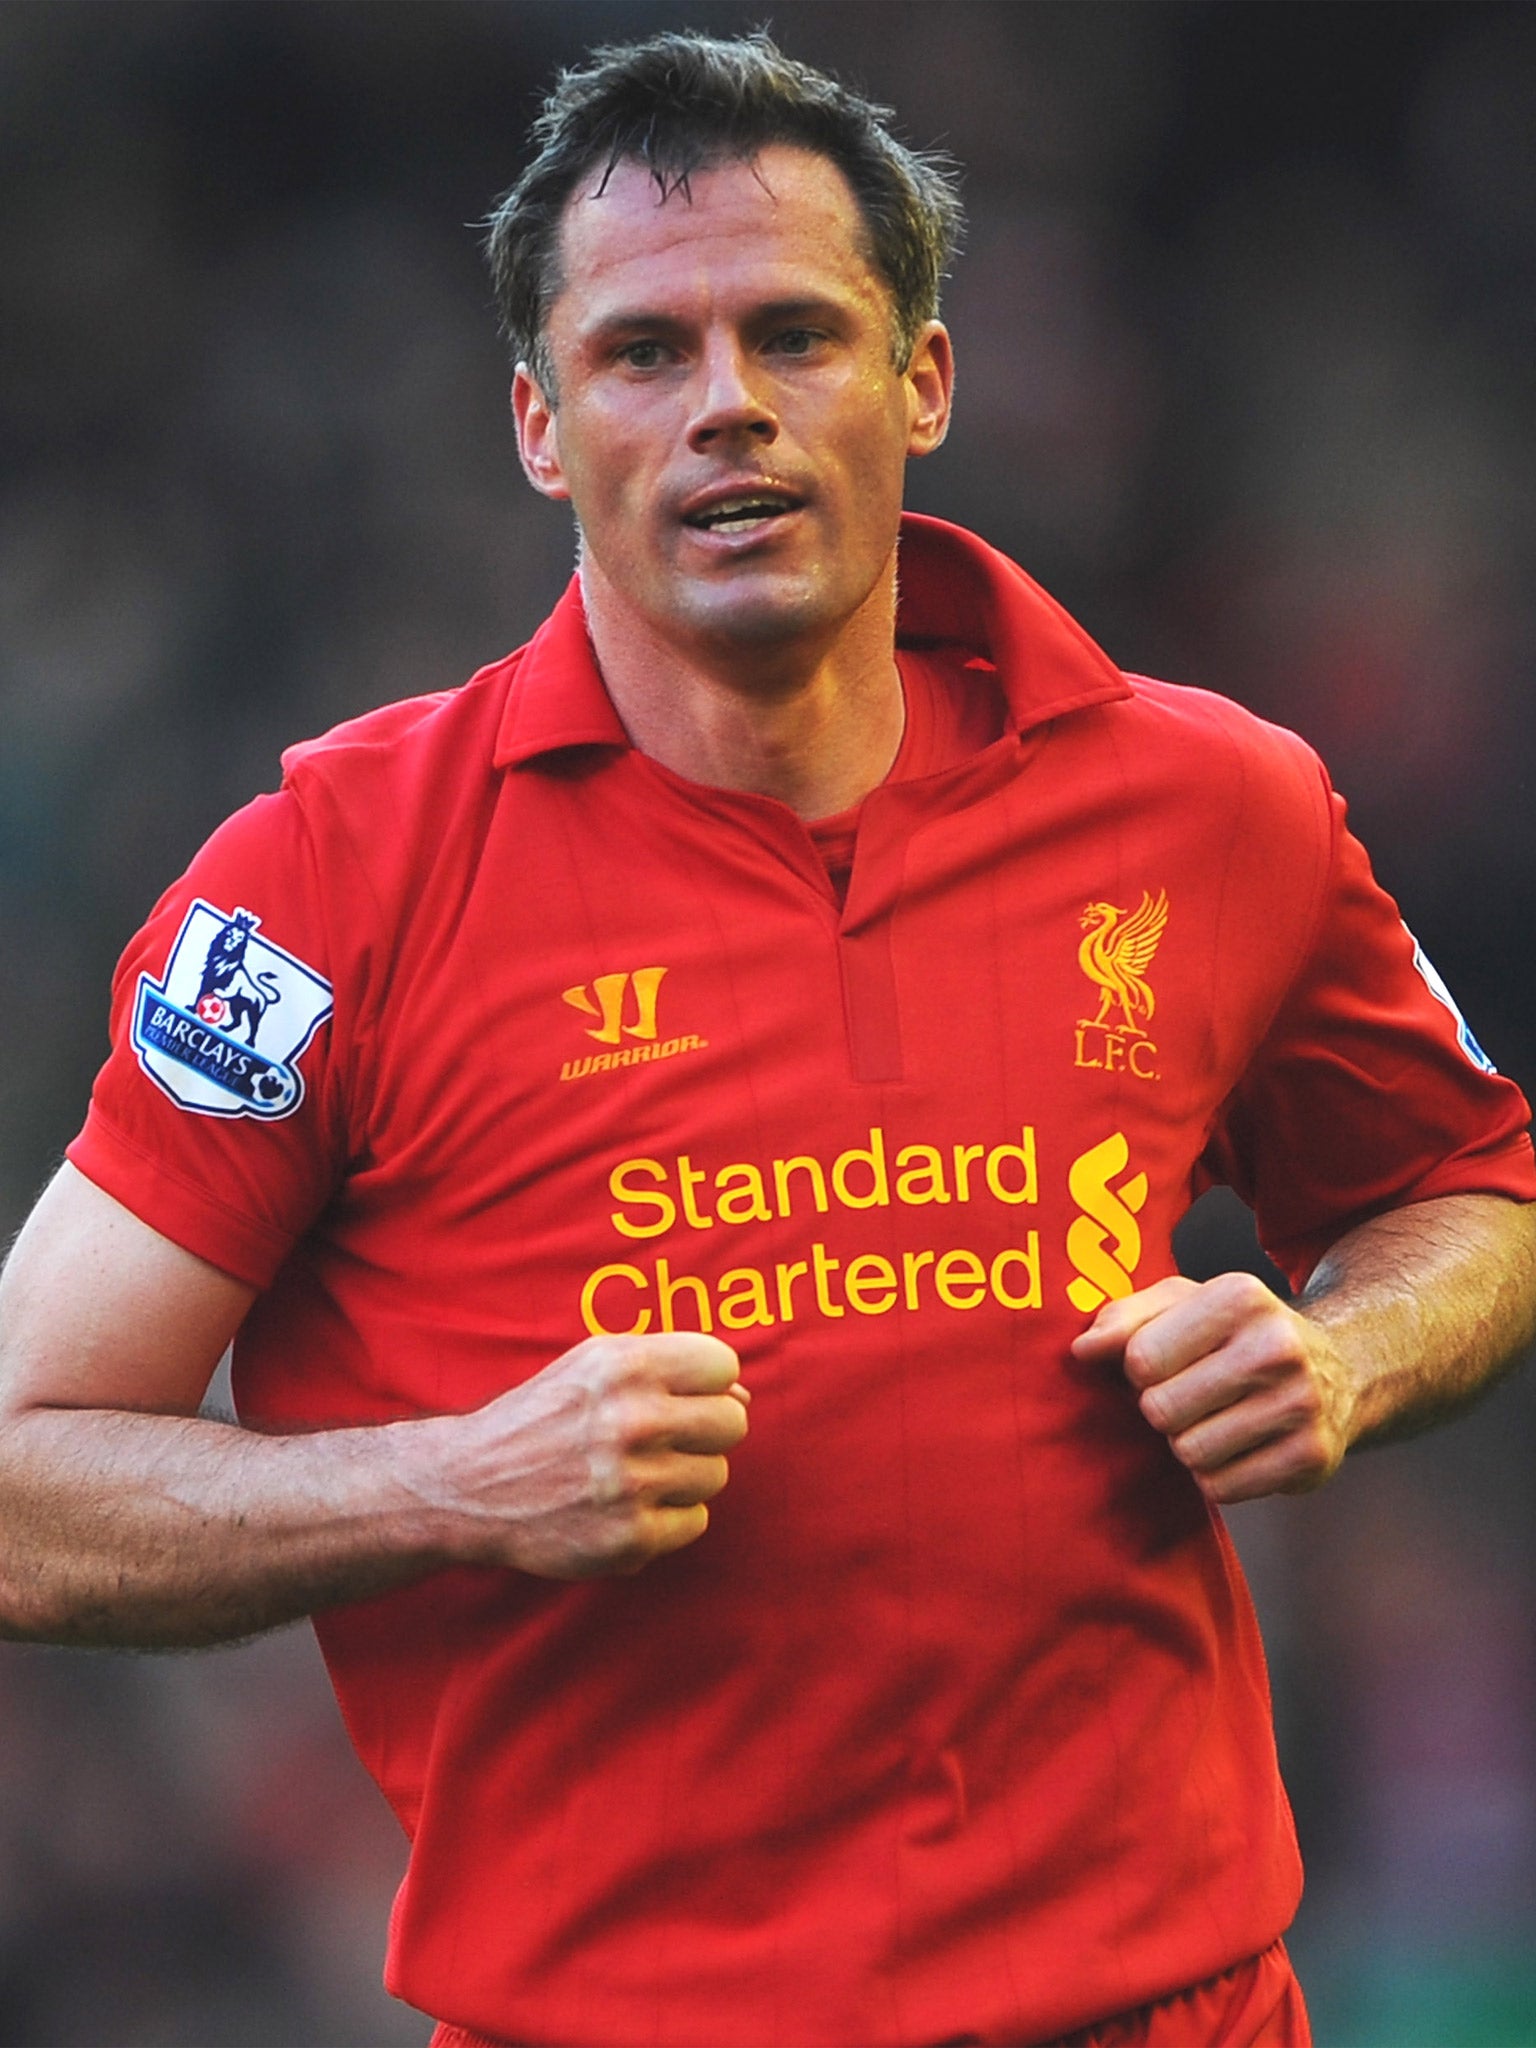 After ending his Liverpool career on Sunday, Carragher will become a Sky pundit